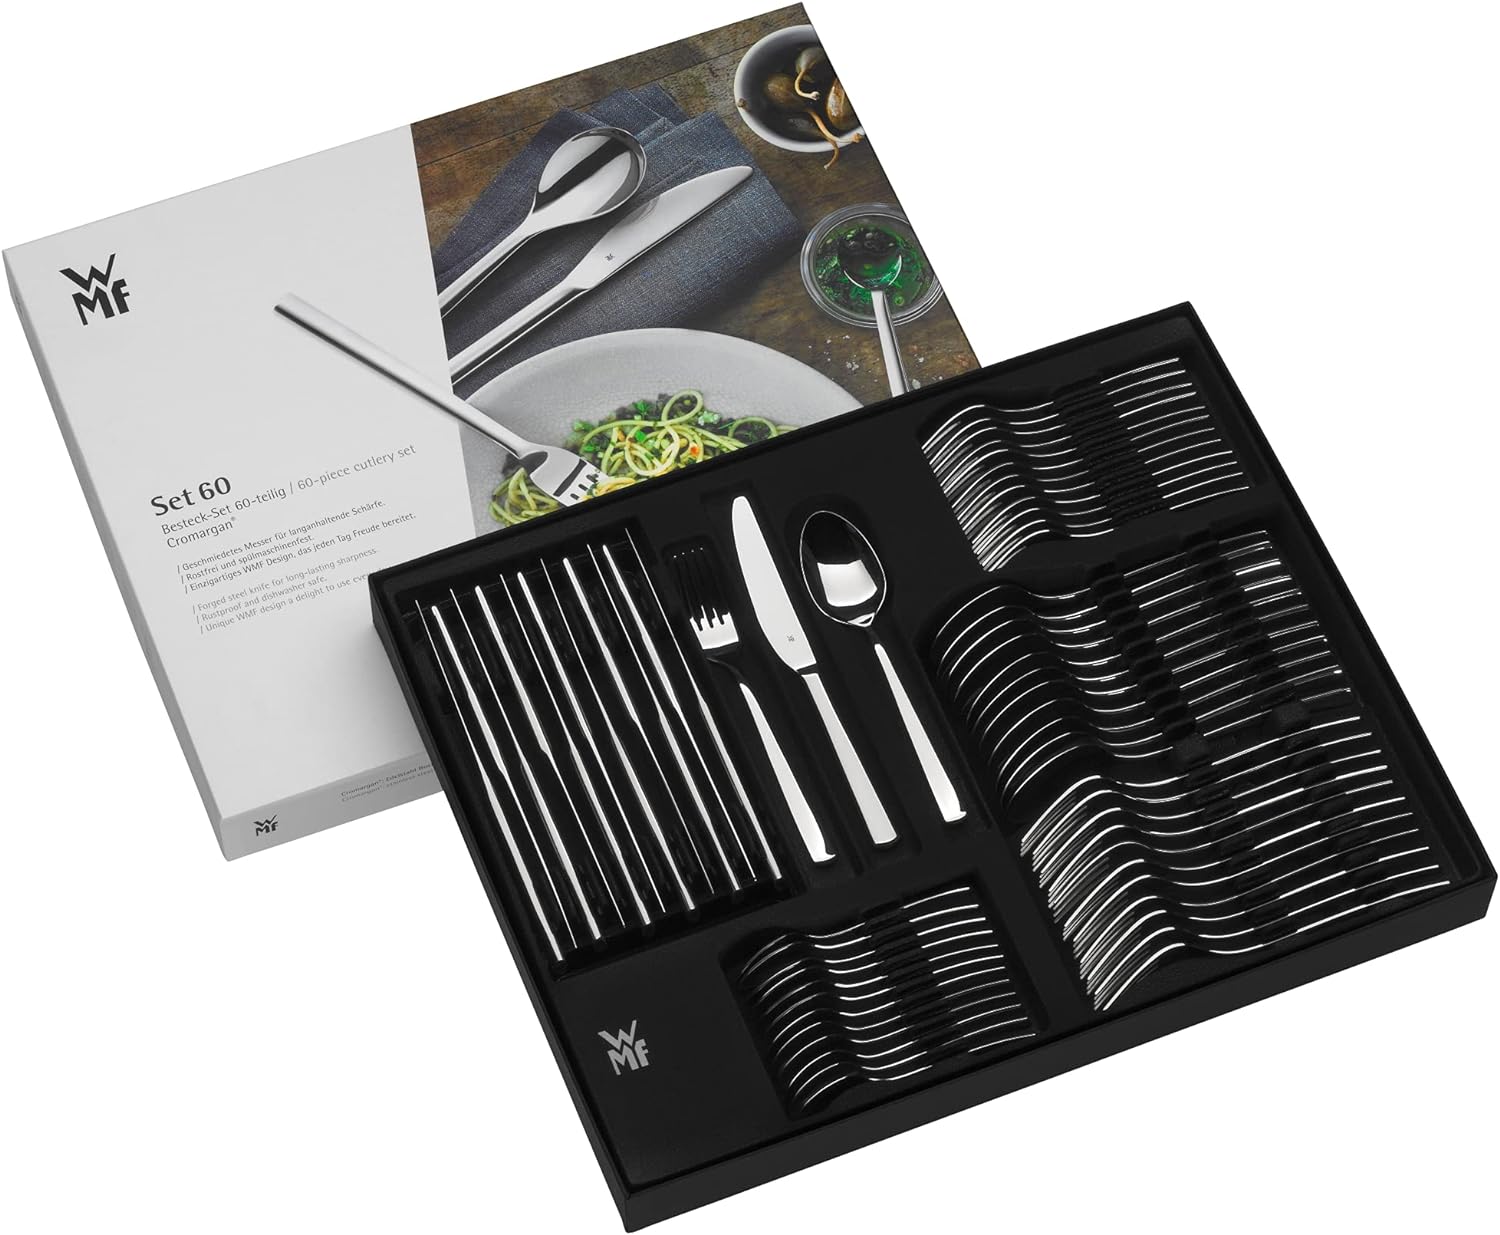 WMF Boston Cutlery Set 60 Pieces for 12 People Monobloc Knives Polished Cromargan Stainless Steel Dishwasher Safe